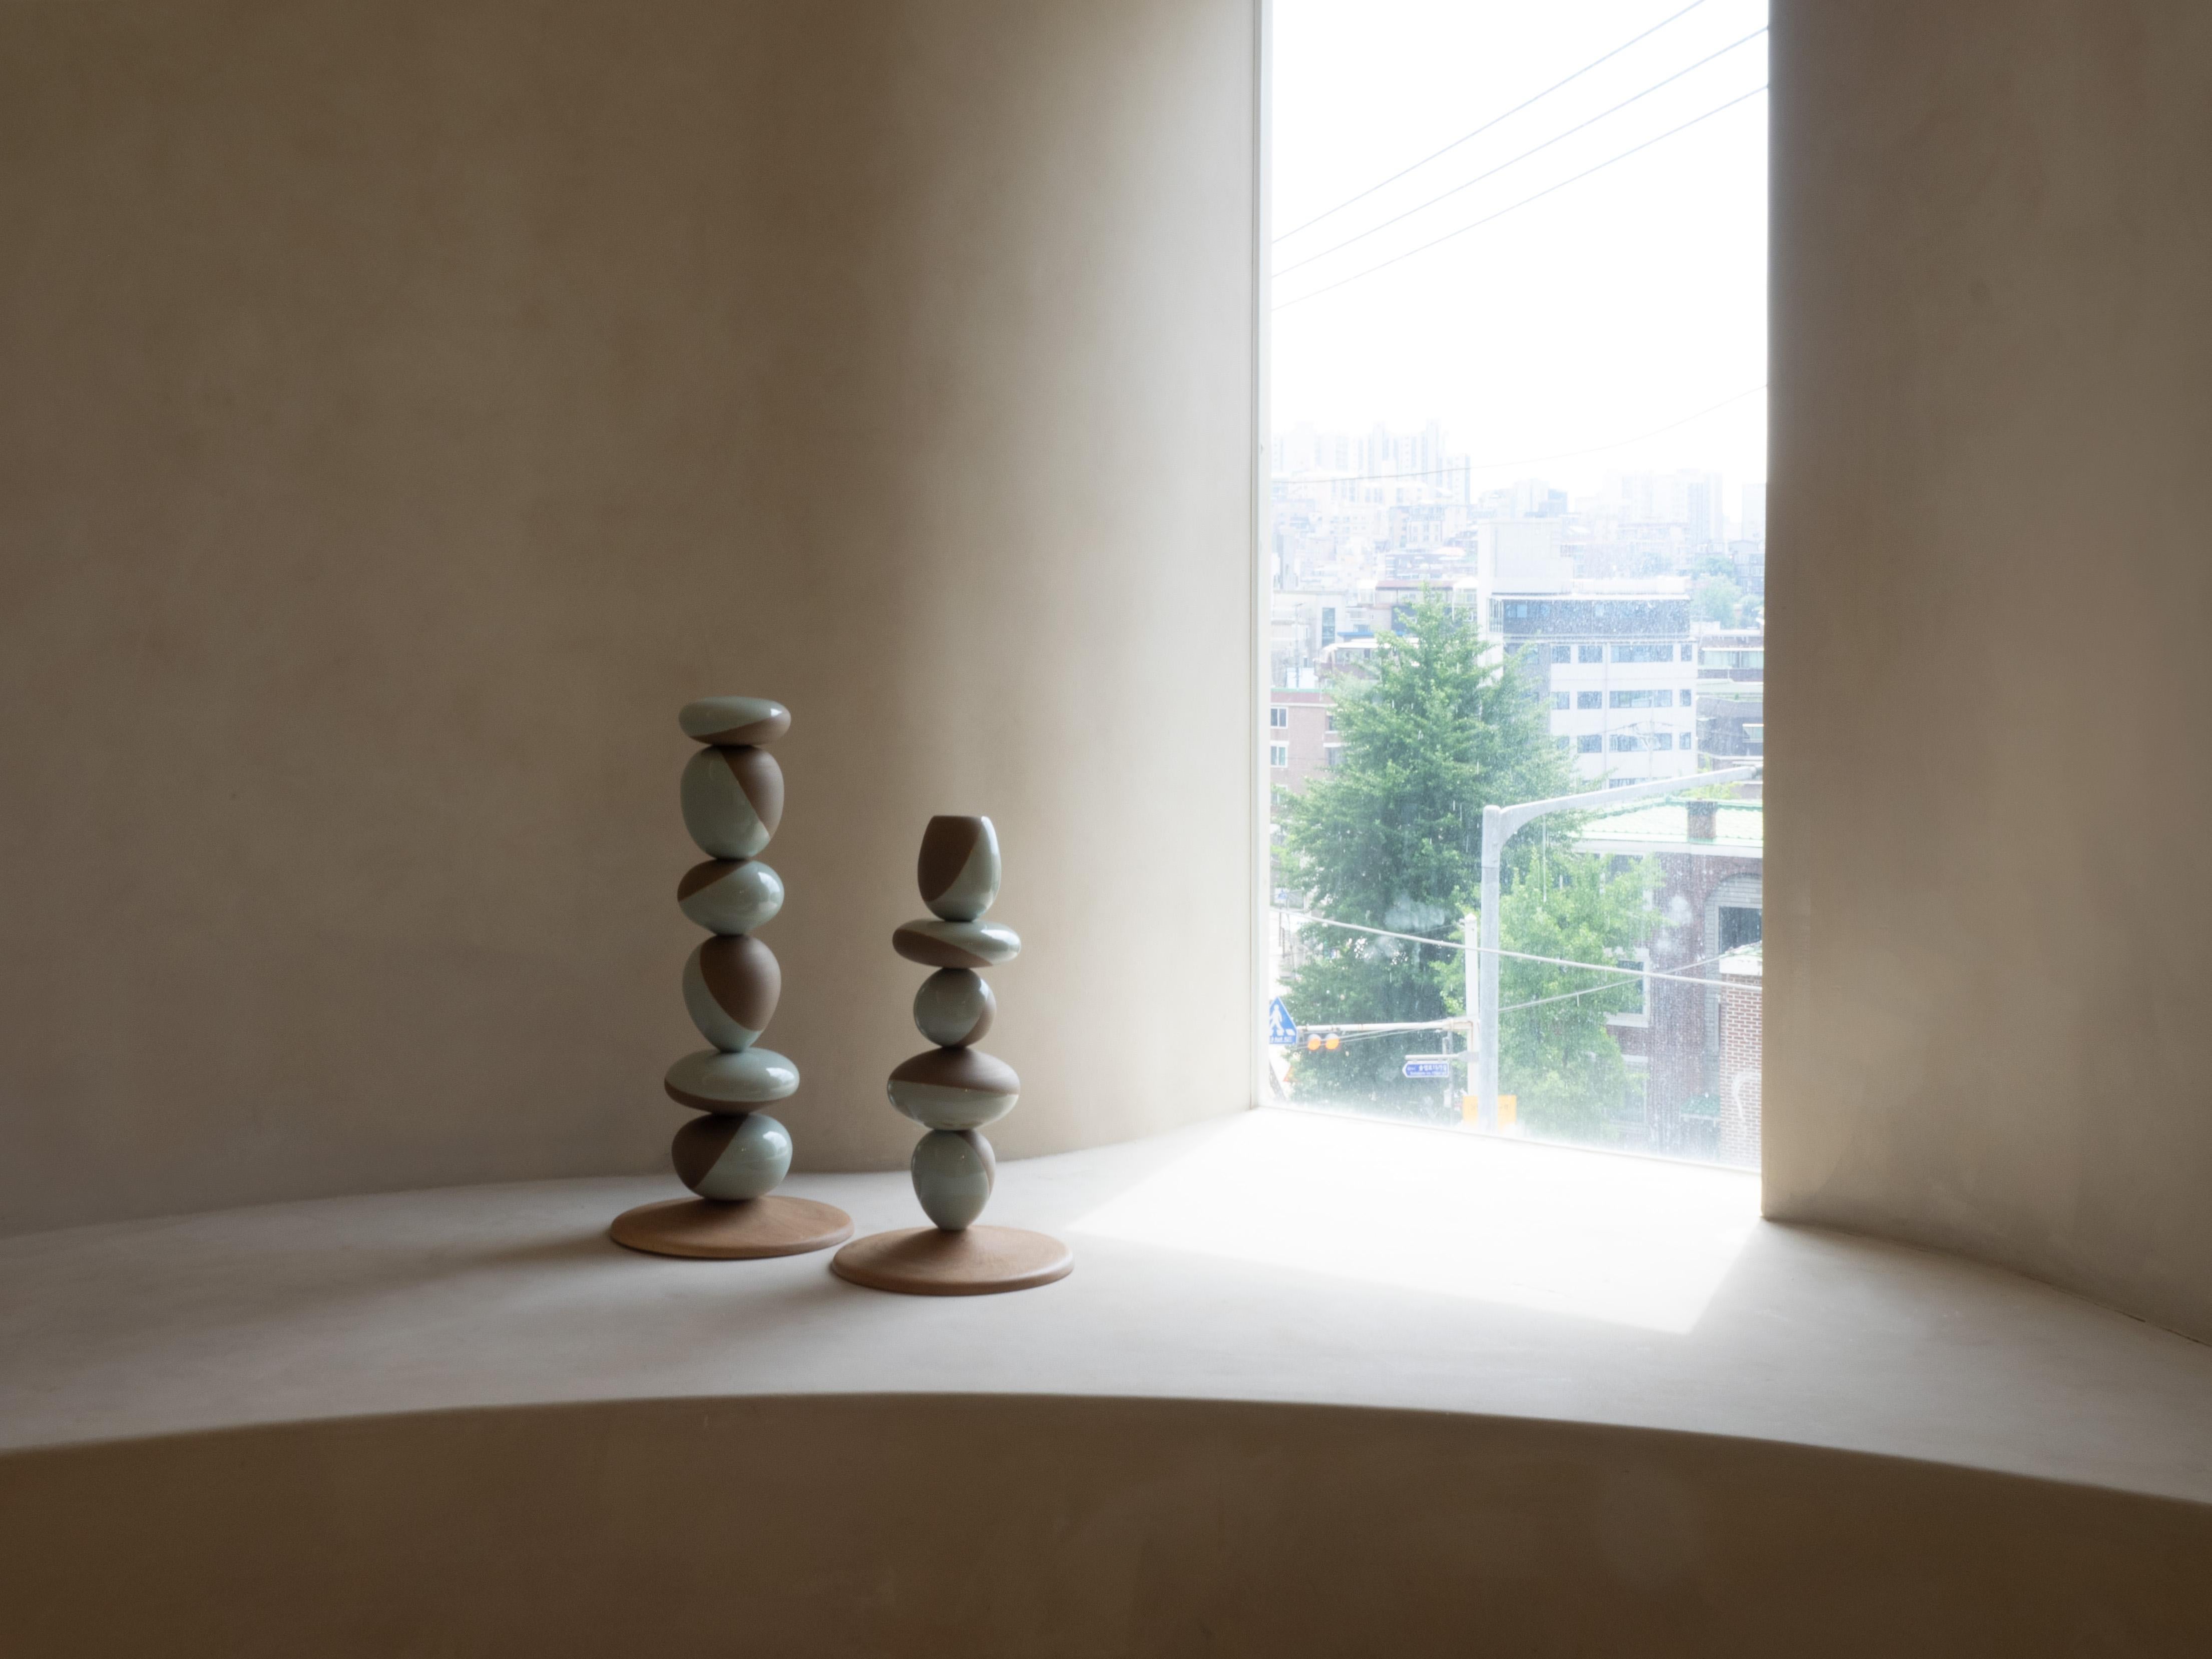 Stack Vessel II by Soo Joo is a stack sculpture made in Korean Ceramic. It is a timeless form, reminiscent of a stack of perfectly balanced river stones. This is the taller of the two sculpture pairs. The Stack Vessel series is created with